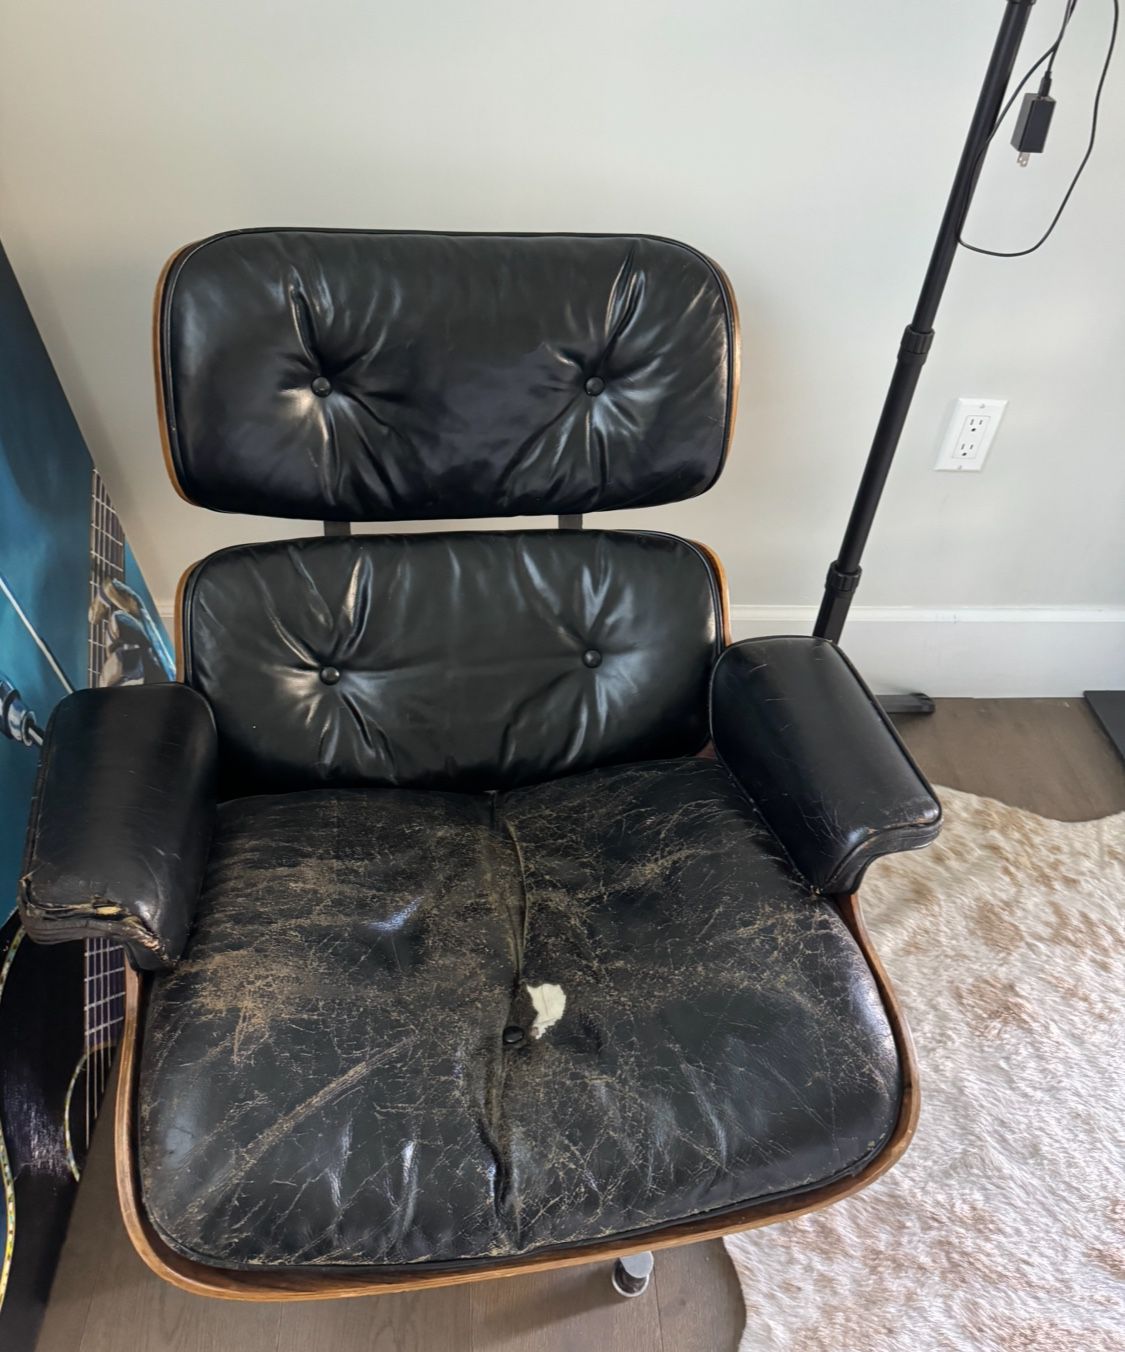 Eames Chair - Vintage - Repaired - Deal - $3000